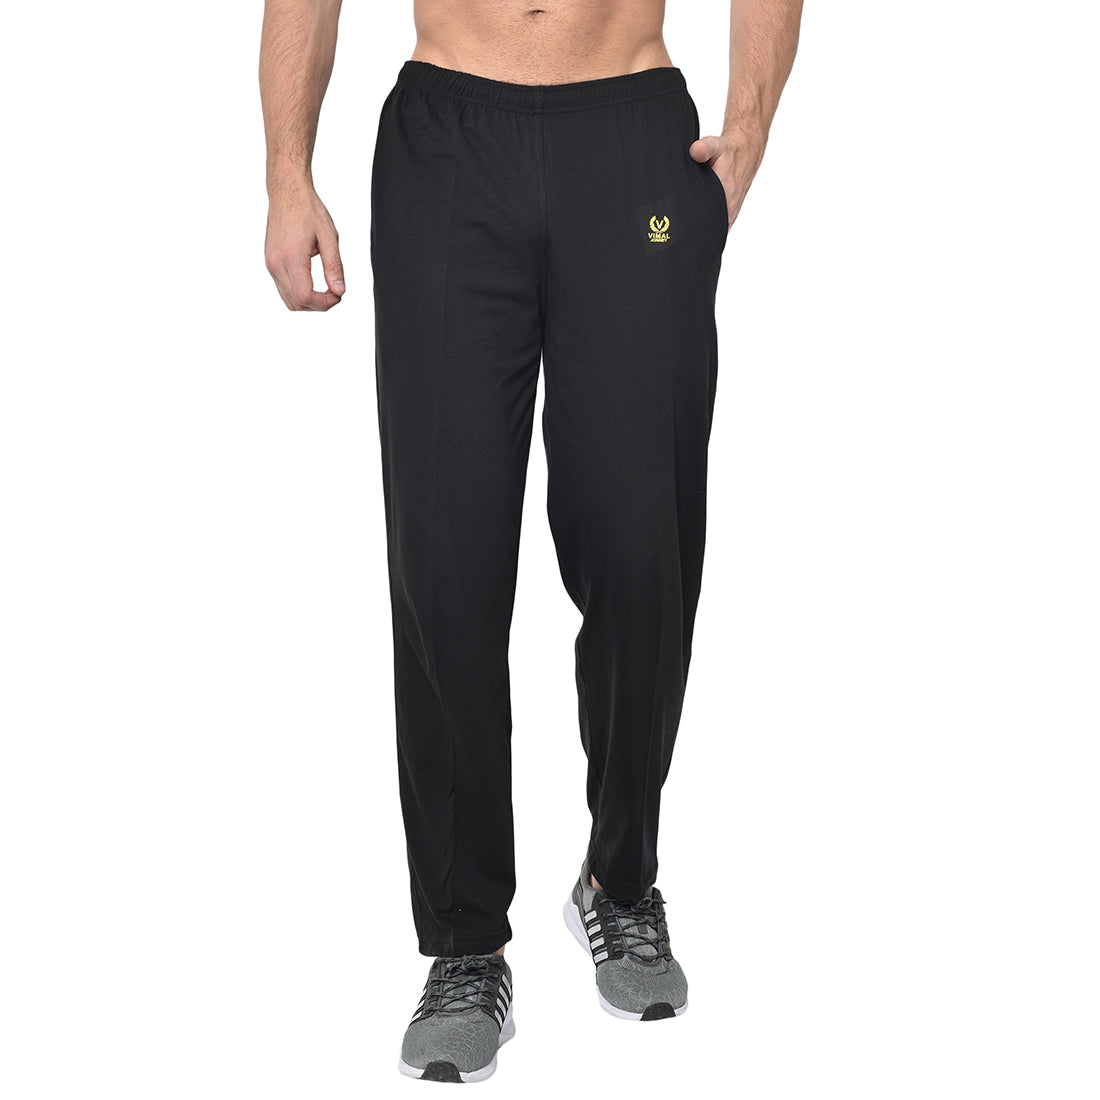 Mens Reflective Reflective Cargo Pants Casual Jogger Style For Night  Running And Streetwear From Surpemacy, $13.27 | DHgate.Com